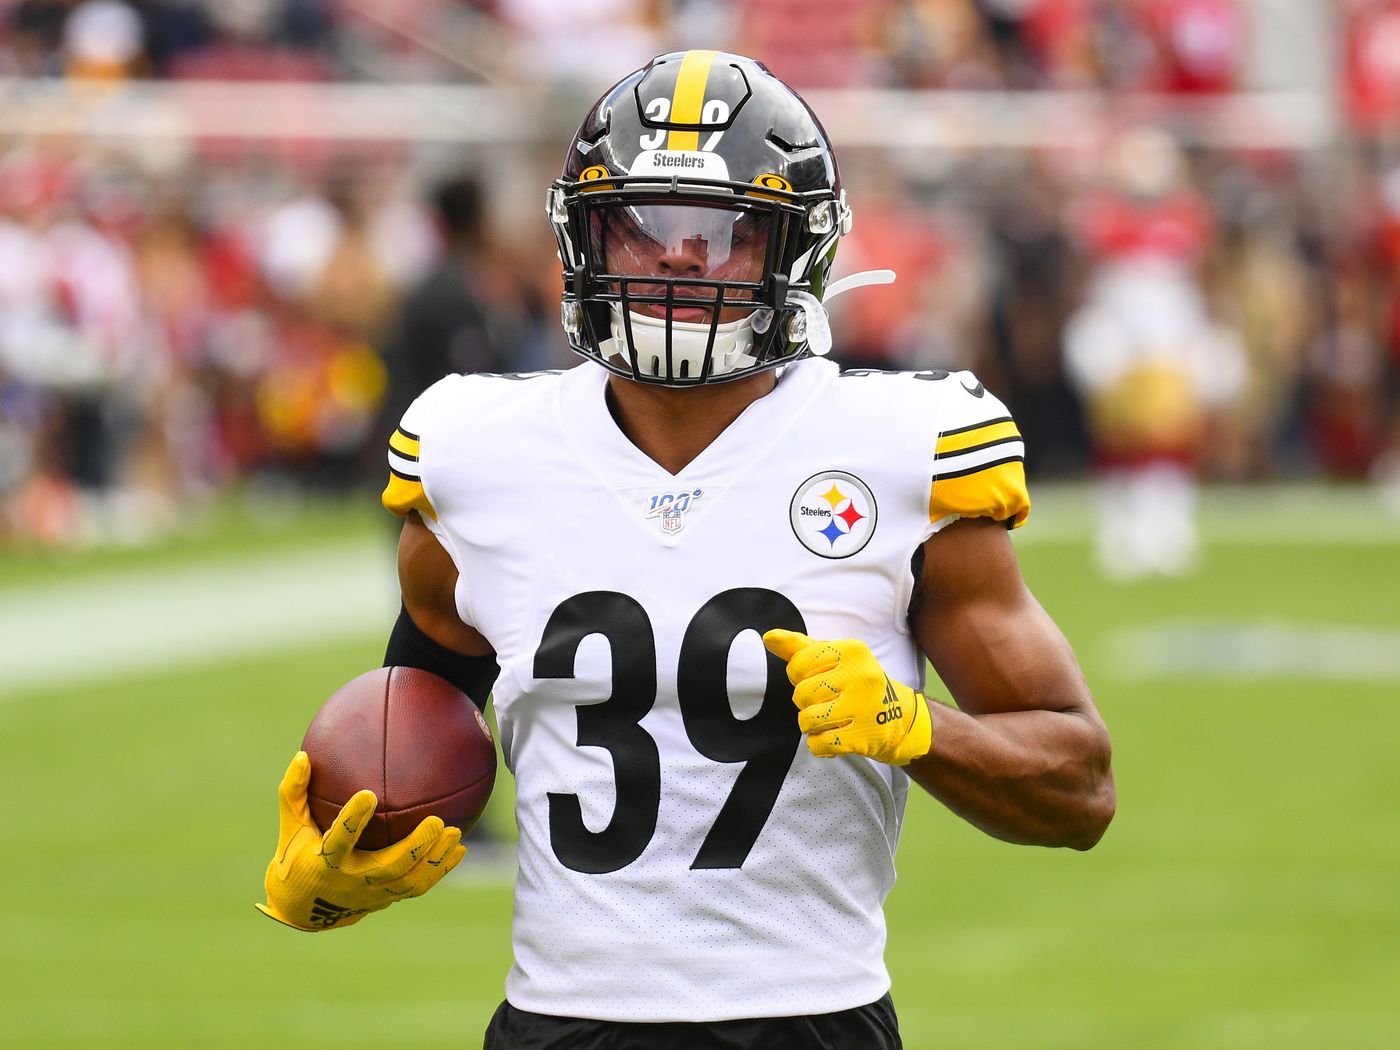 Updating the Steelers projected 2020 NFL draft picks